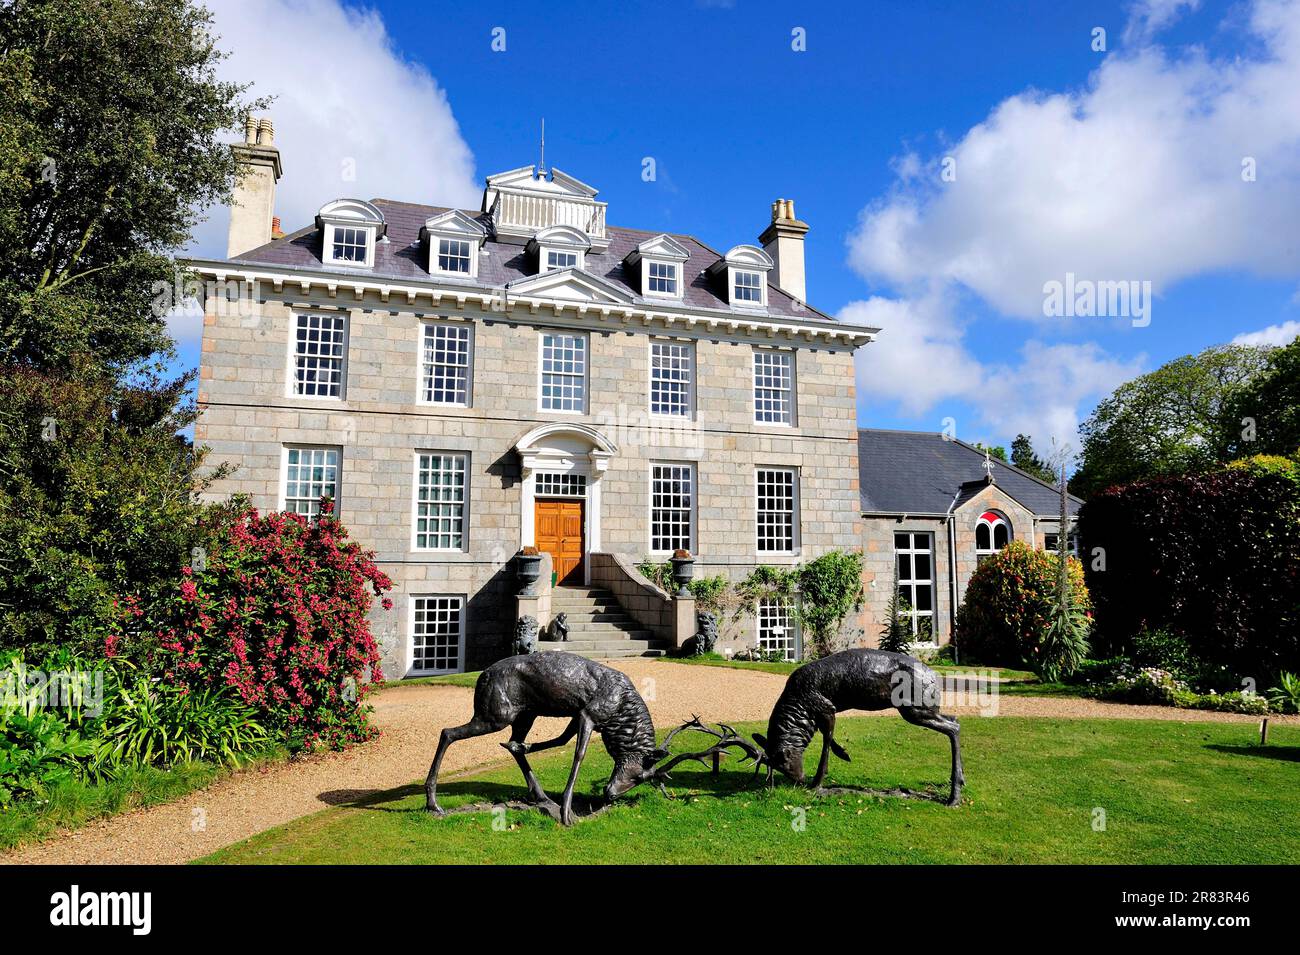 Peter de Sausmarez' Country House and Gardens, St Martin, Channel Islands, Guernsey Foto Stock